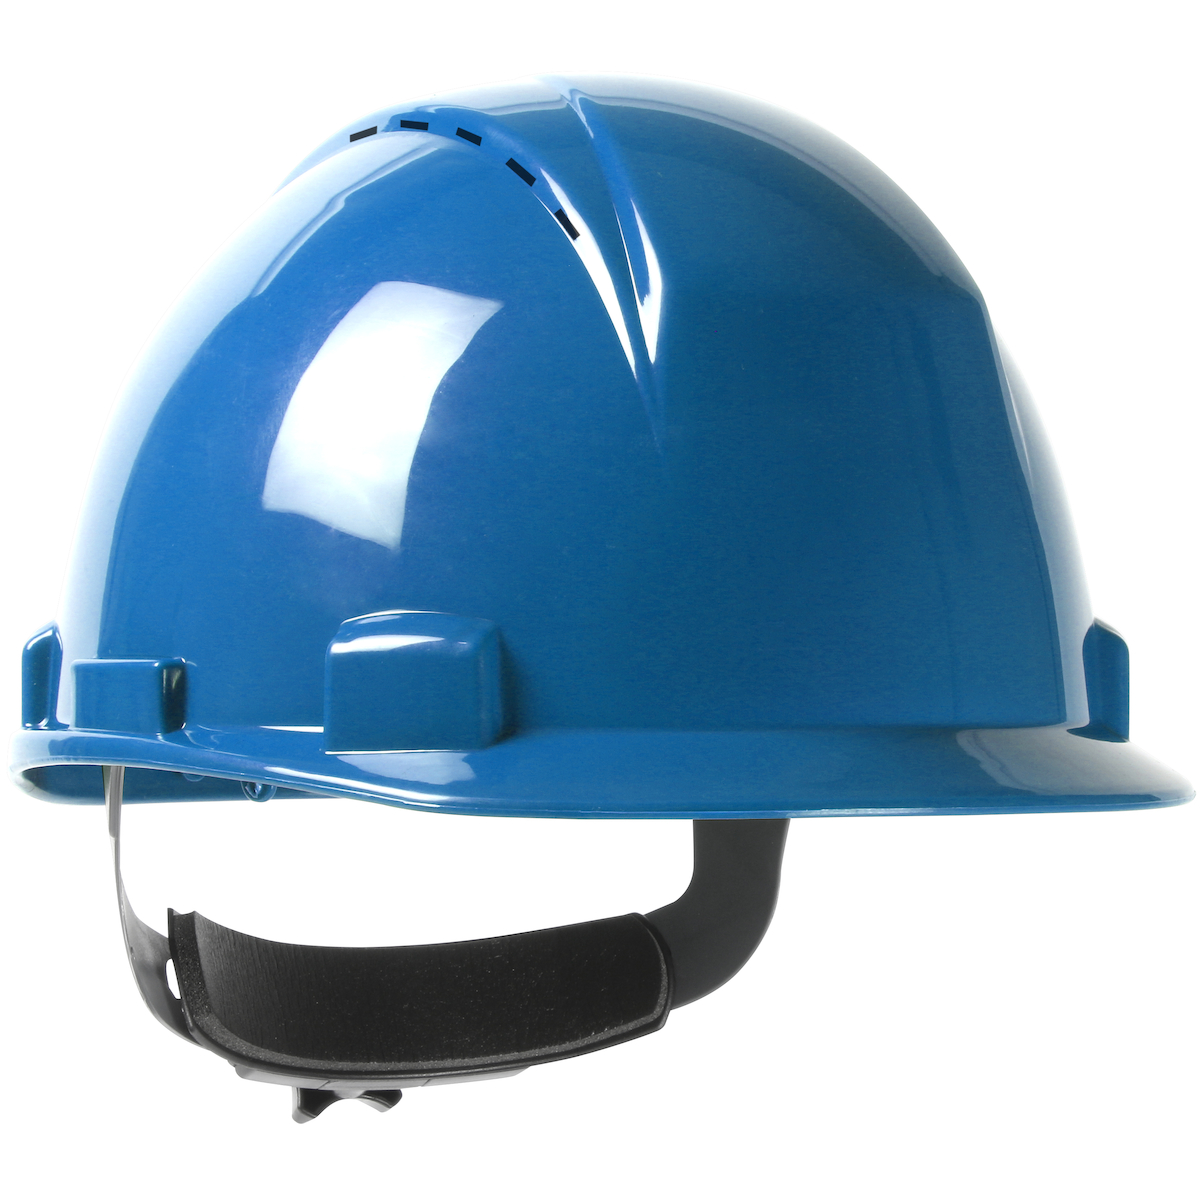 TYPE II, SHORT BRIM CAP STYLE HARD HAT WITH HDPE SHELL, 4-POINT TEXTILE SUSPENSION AND WHEEL RATCHET ADJUSTMENT